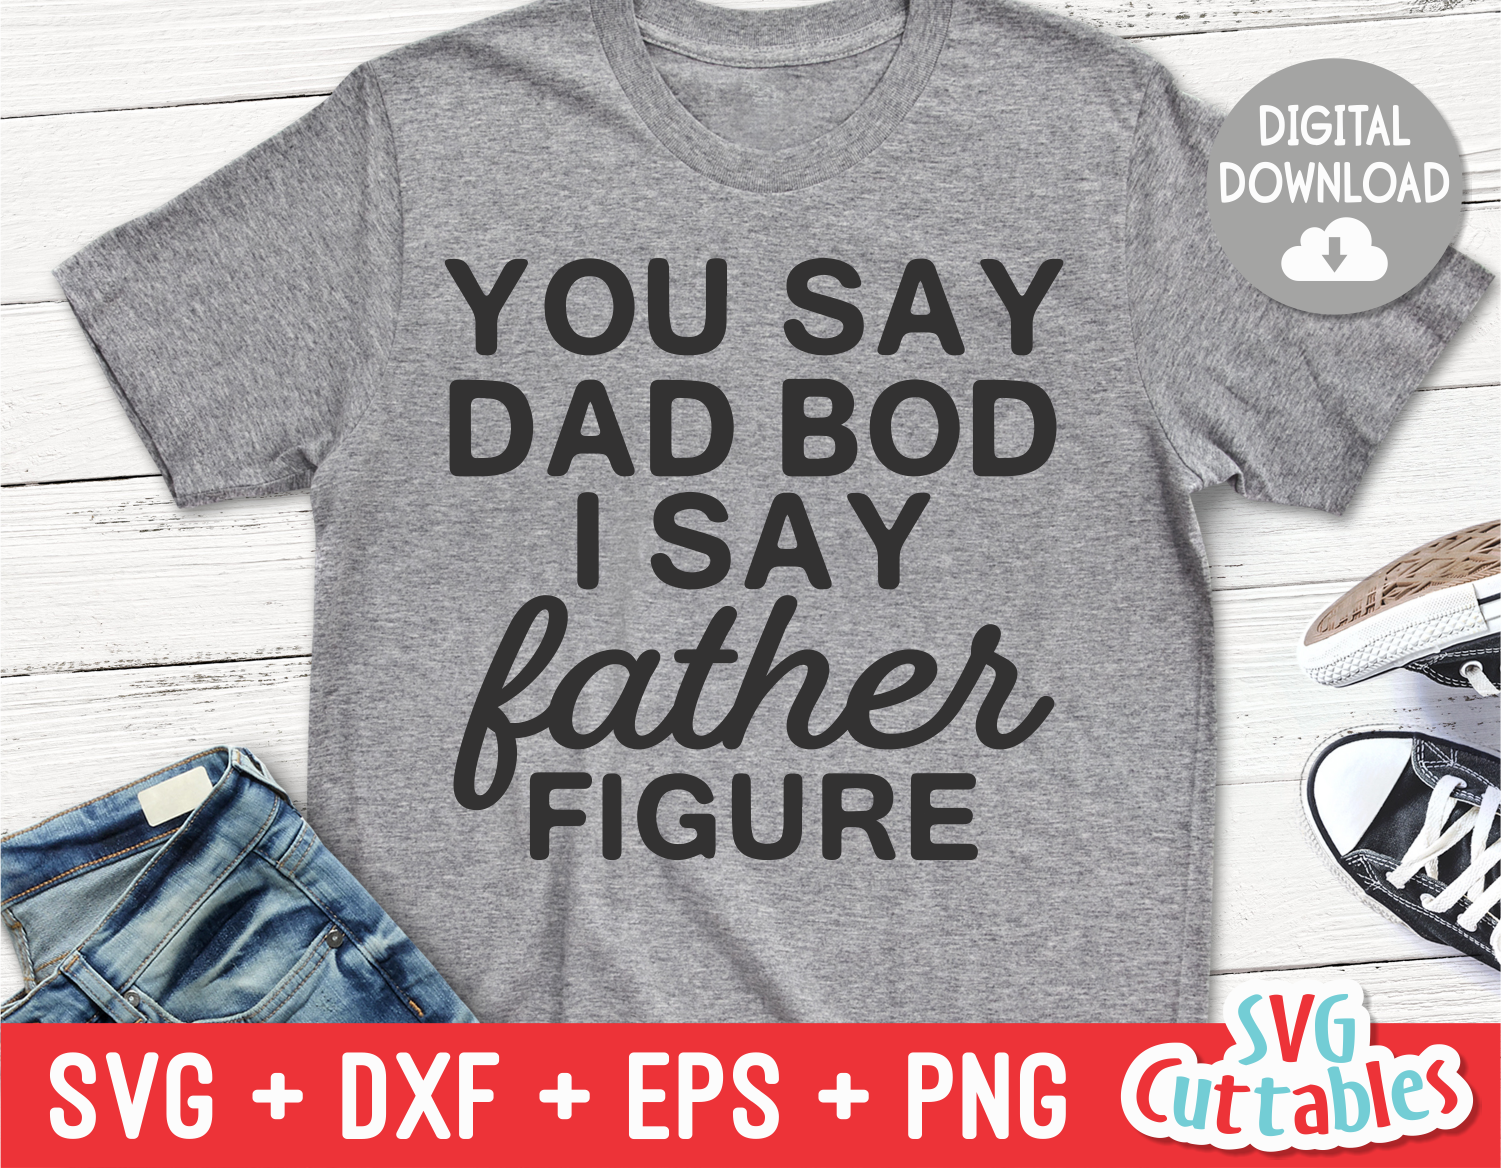 Download You Say Dad Bod I Say Father Figure | Father's Day | SVG ...